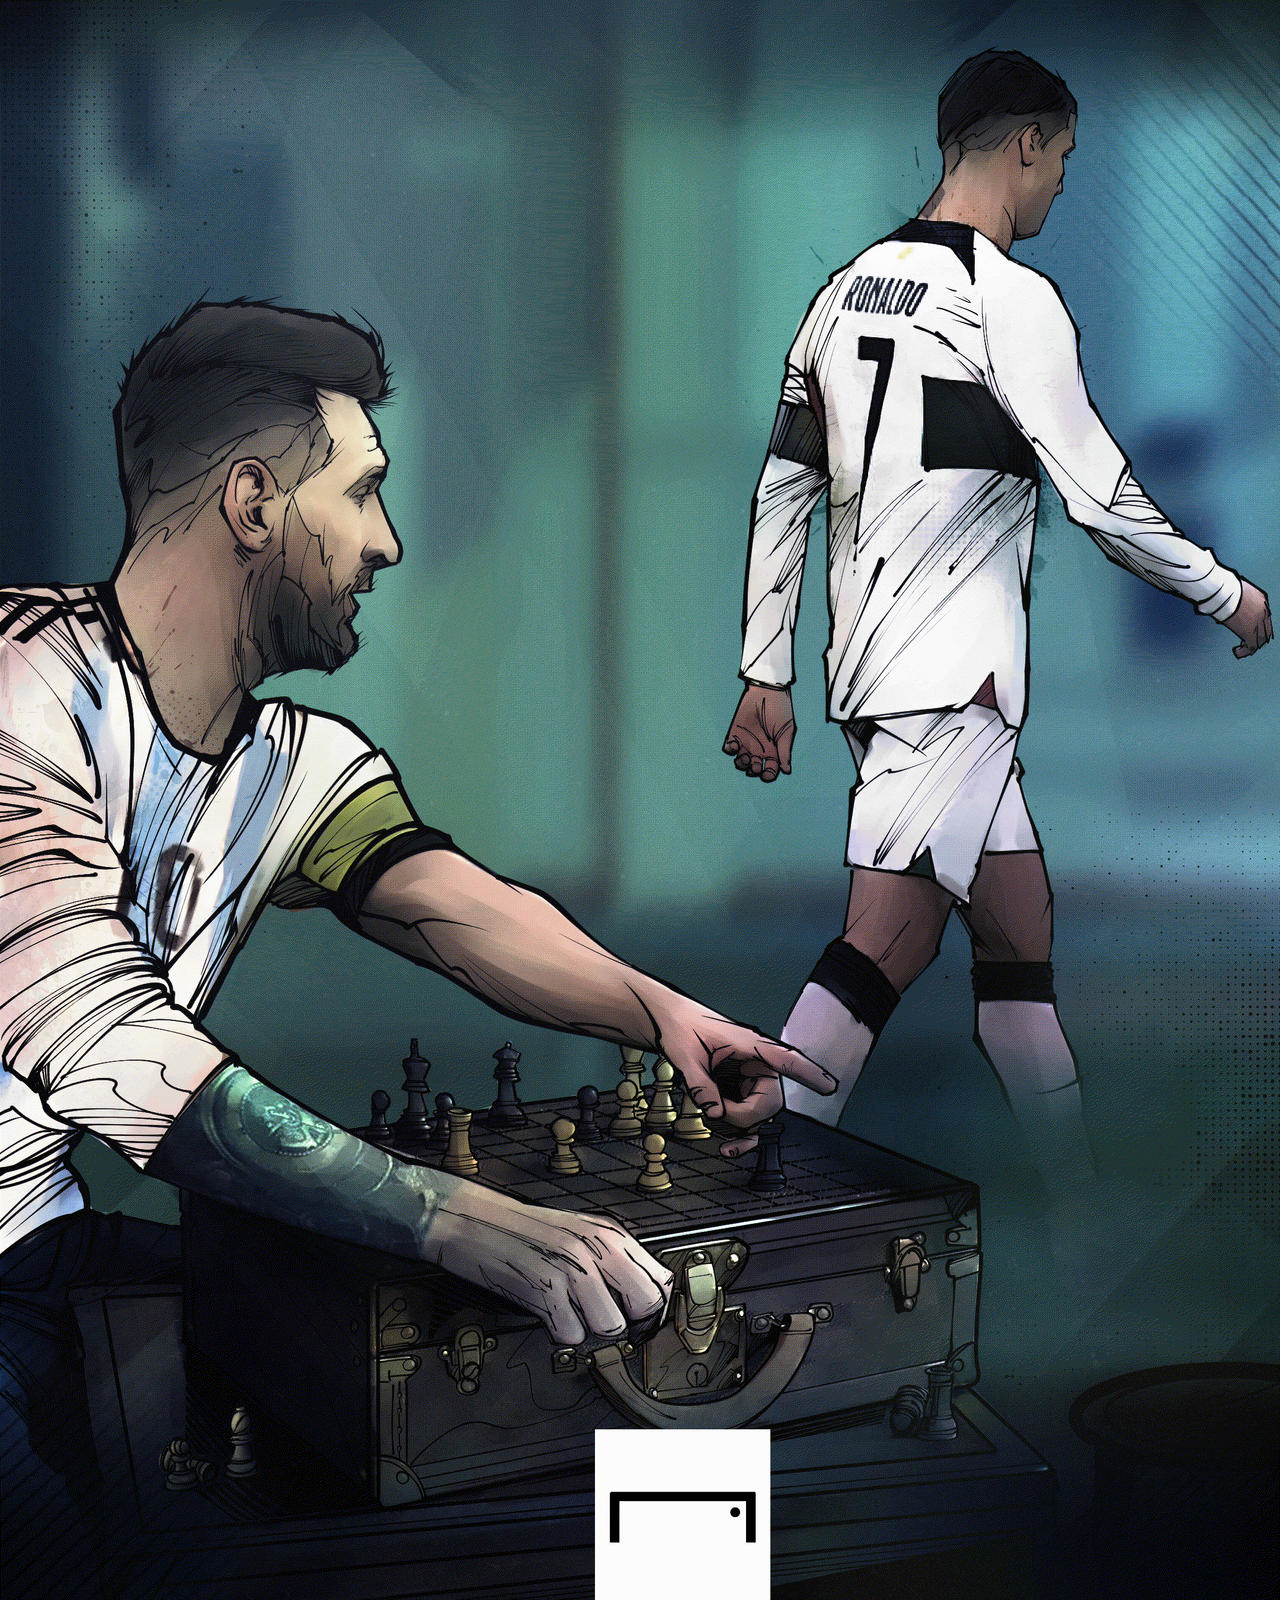 Ronaldo and Messi playing chess by marmadcreative on DeviantArt